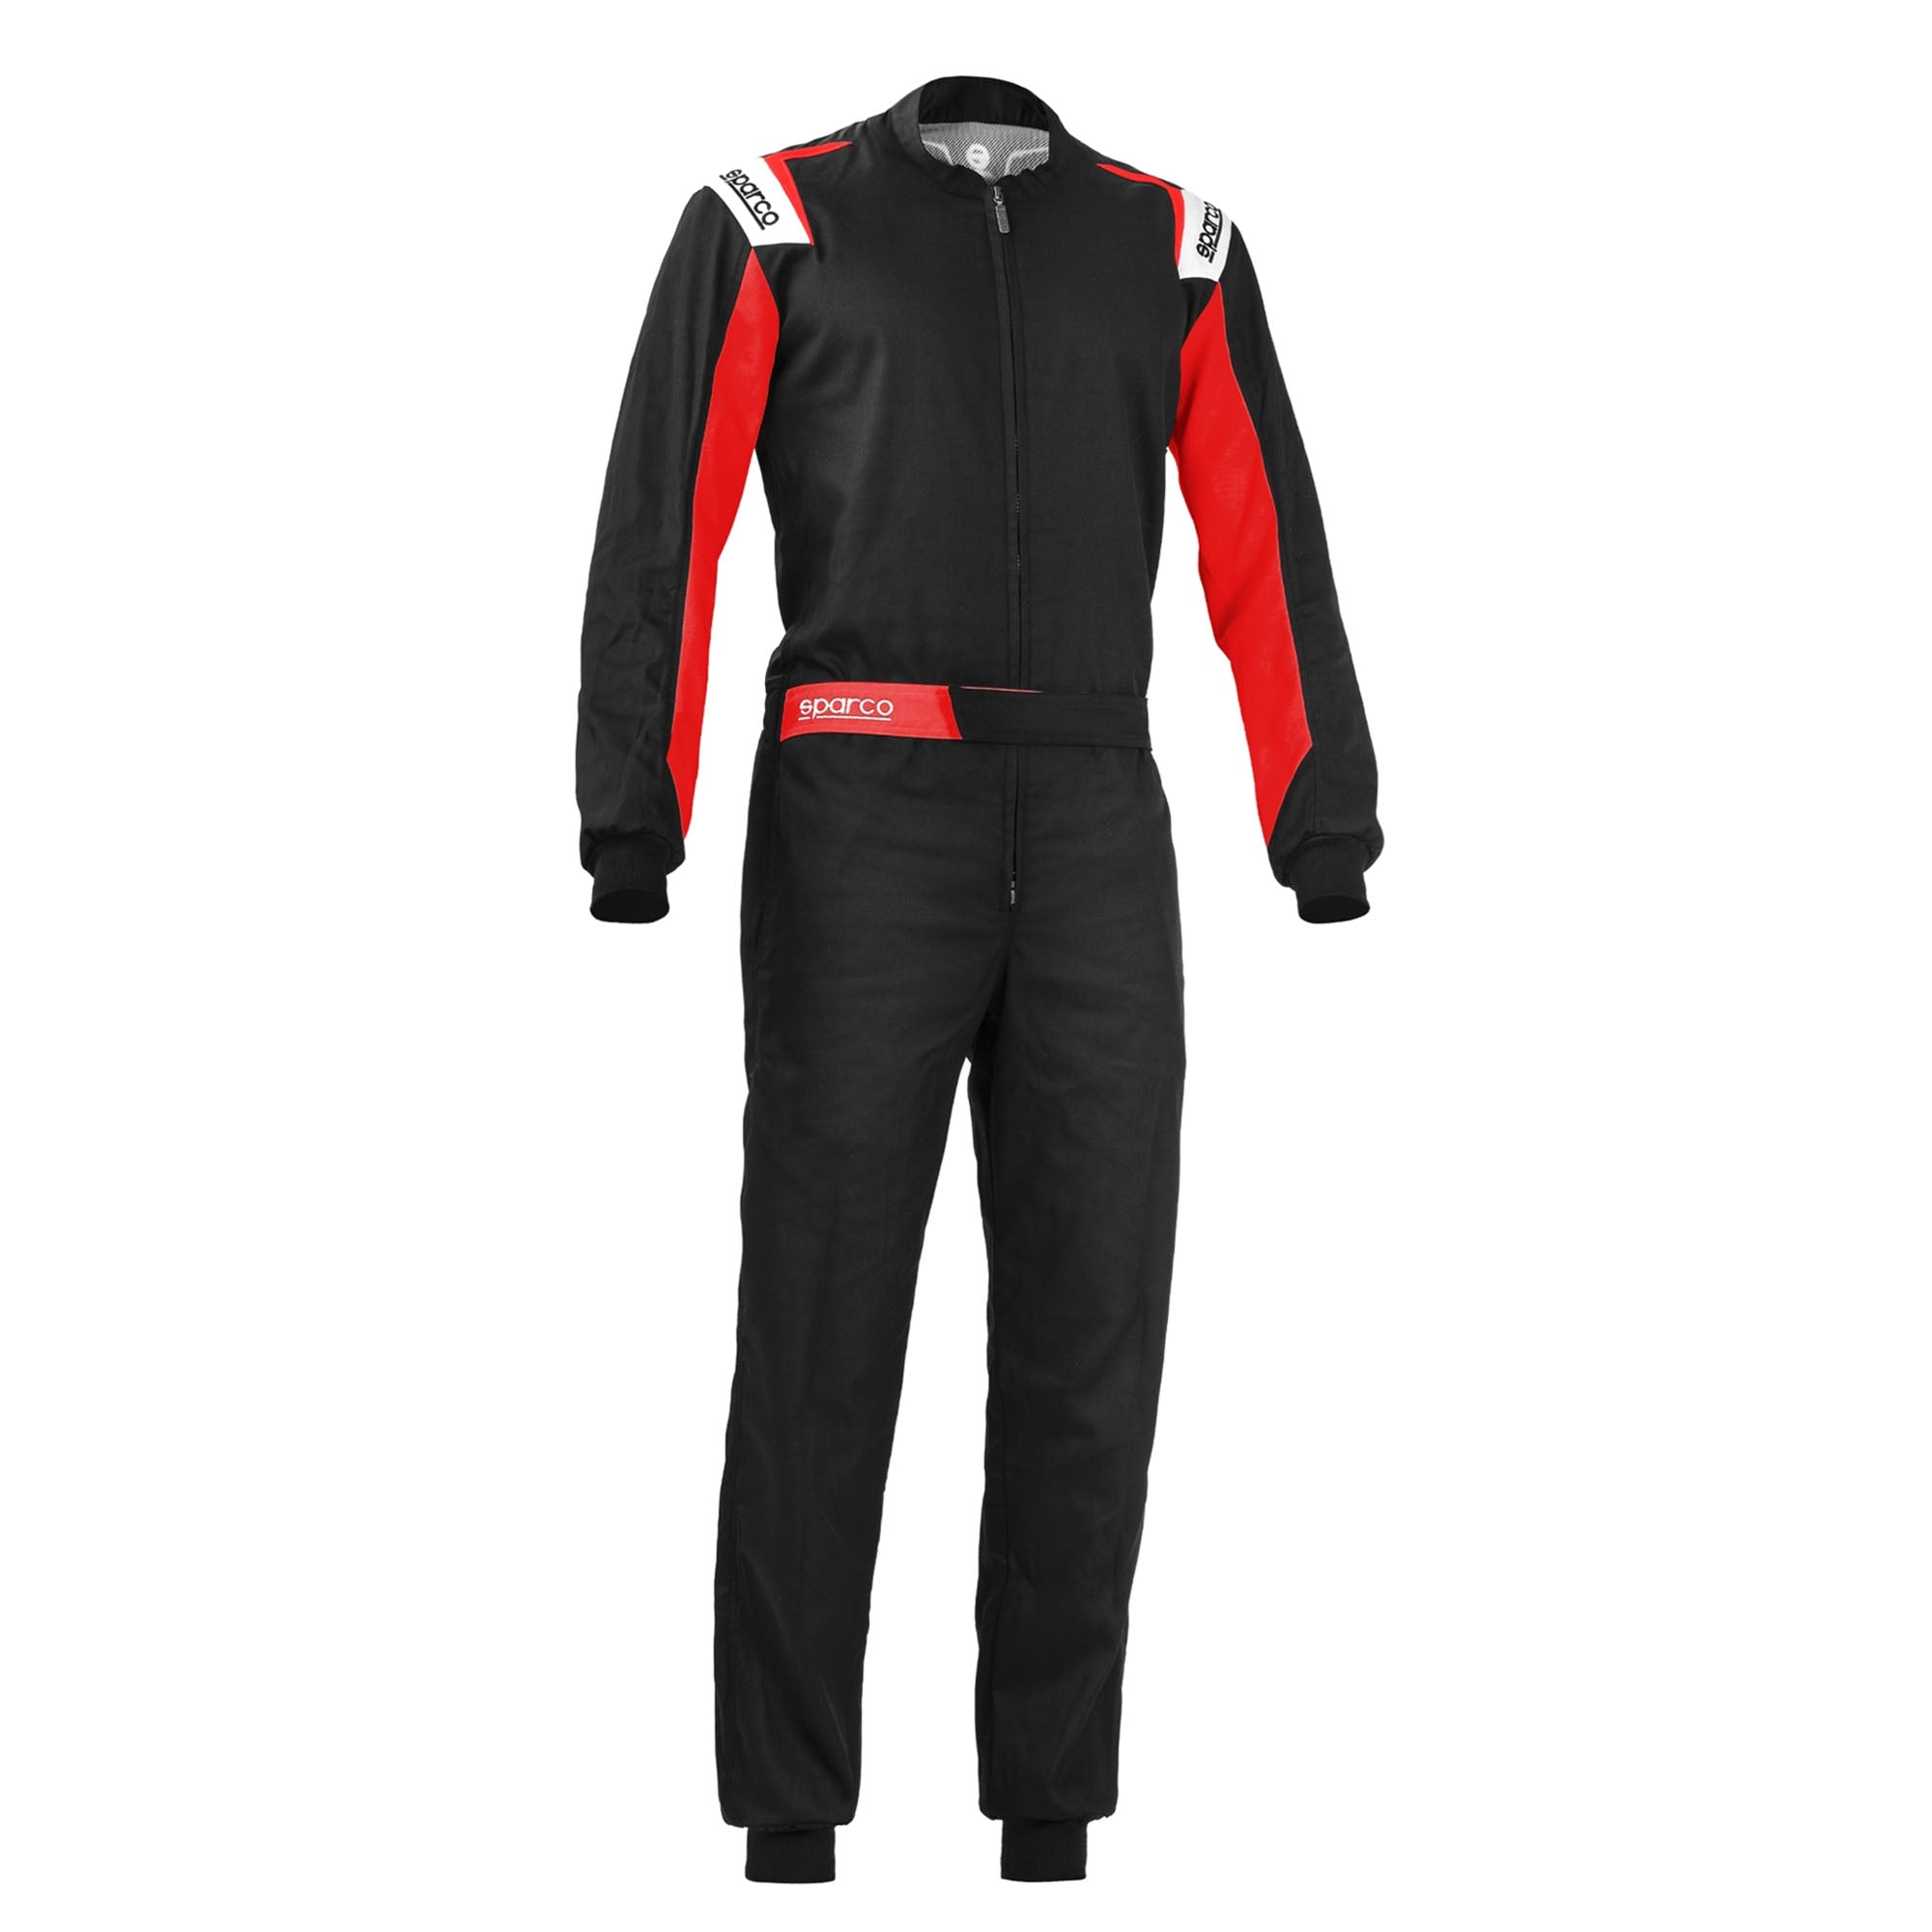 Sparco Rookie Youth Kart Racing Suit